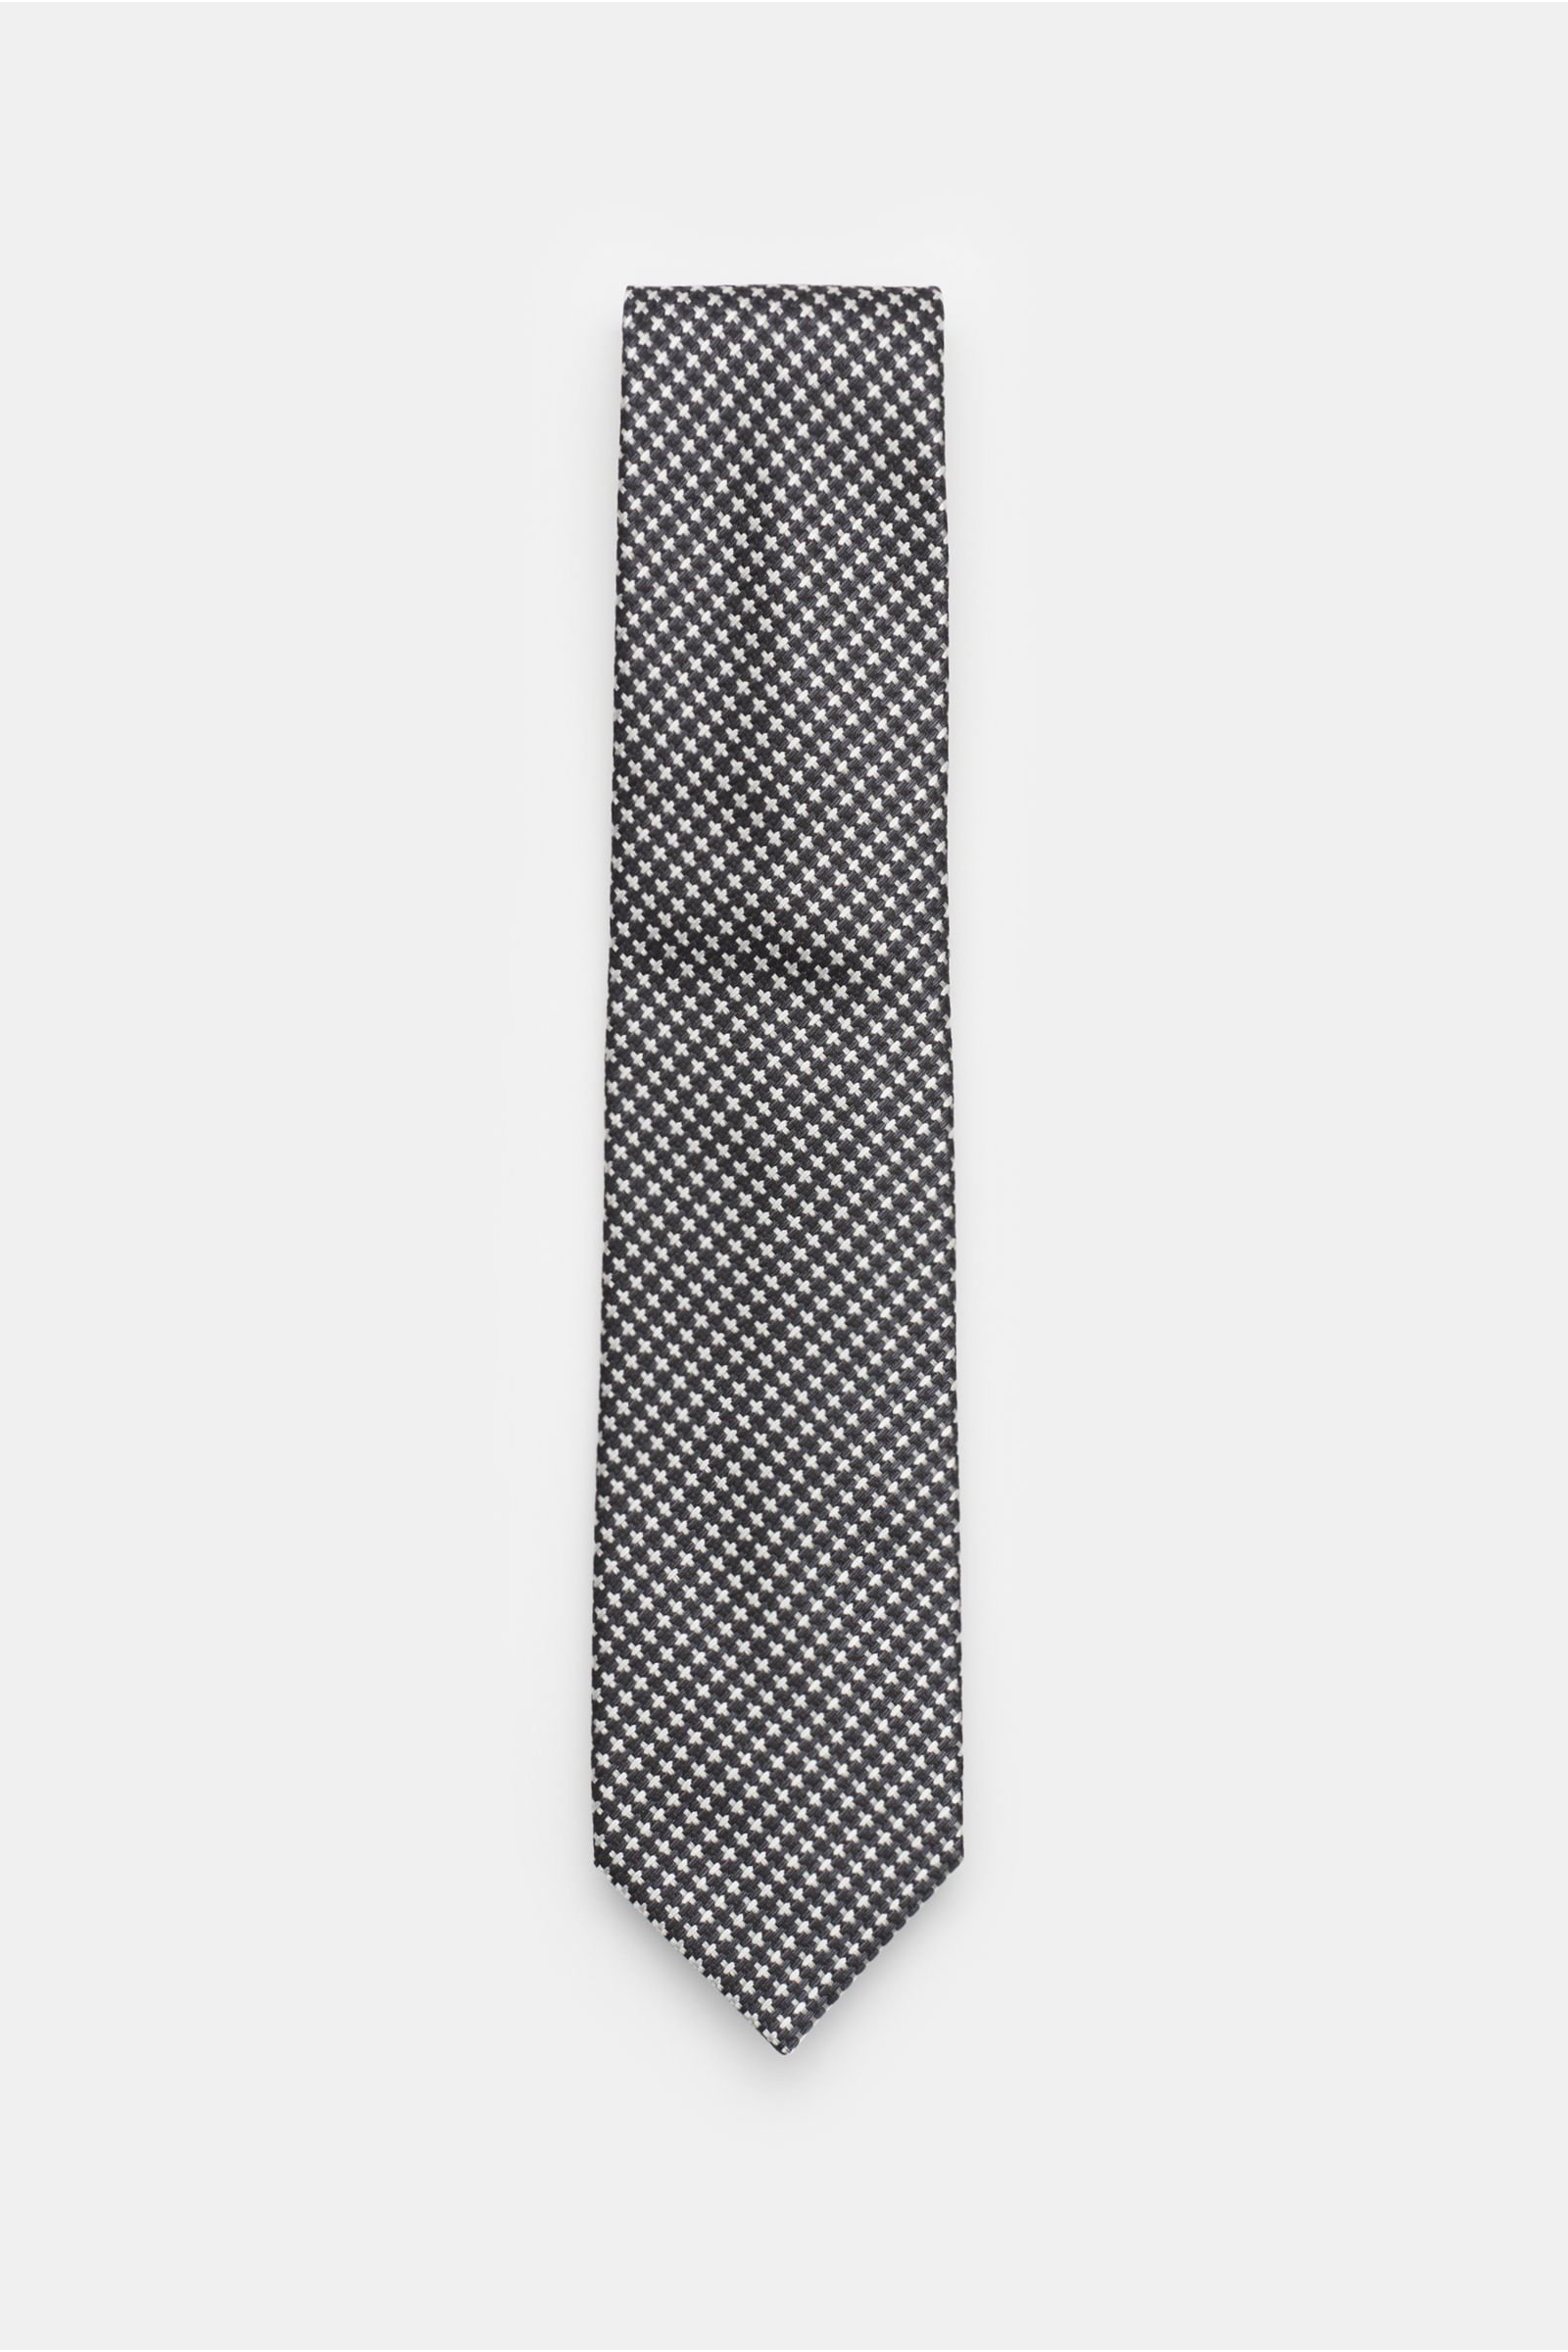 Silk tie anthracite/grey patterned